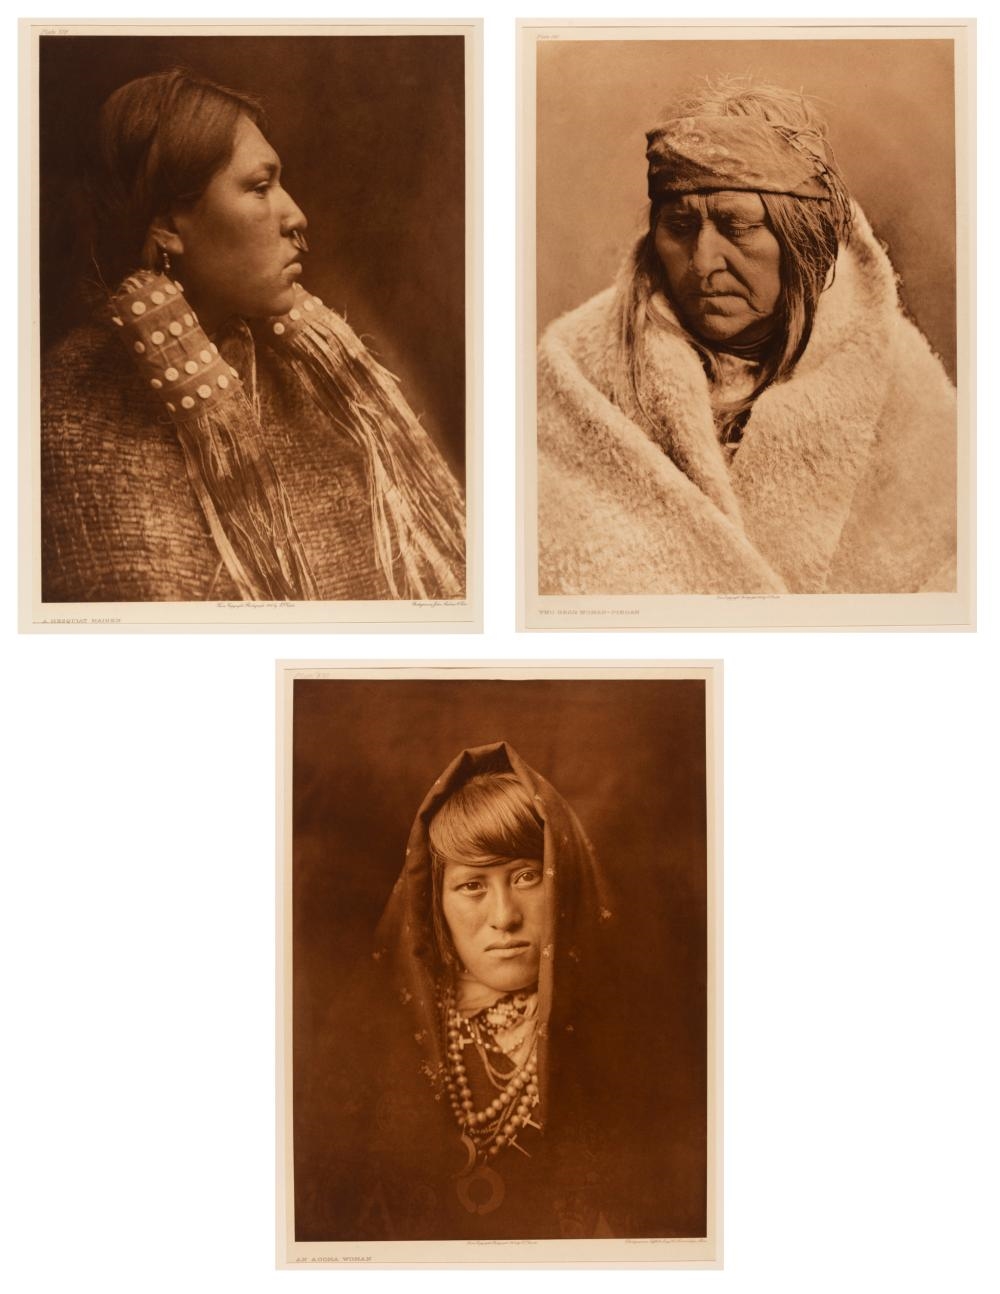 Female Portrait Group of Three: A Hesquiat Maiden, 1915 + An Acoma Woman, 1904 + Two Bear Woman - Piegan, 1911 by Edward S. Curtis, 1915